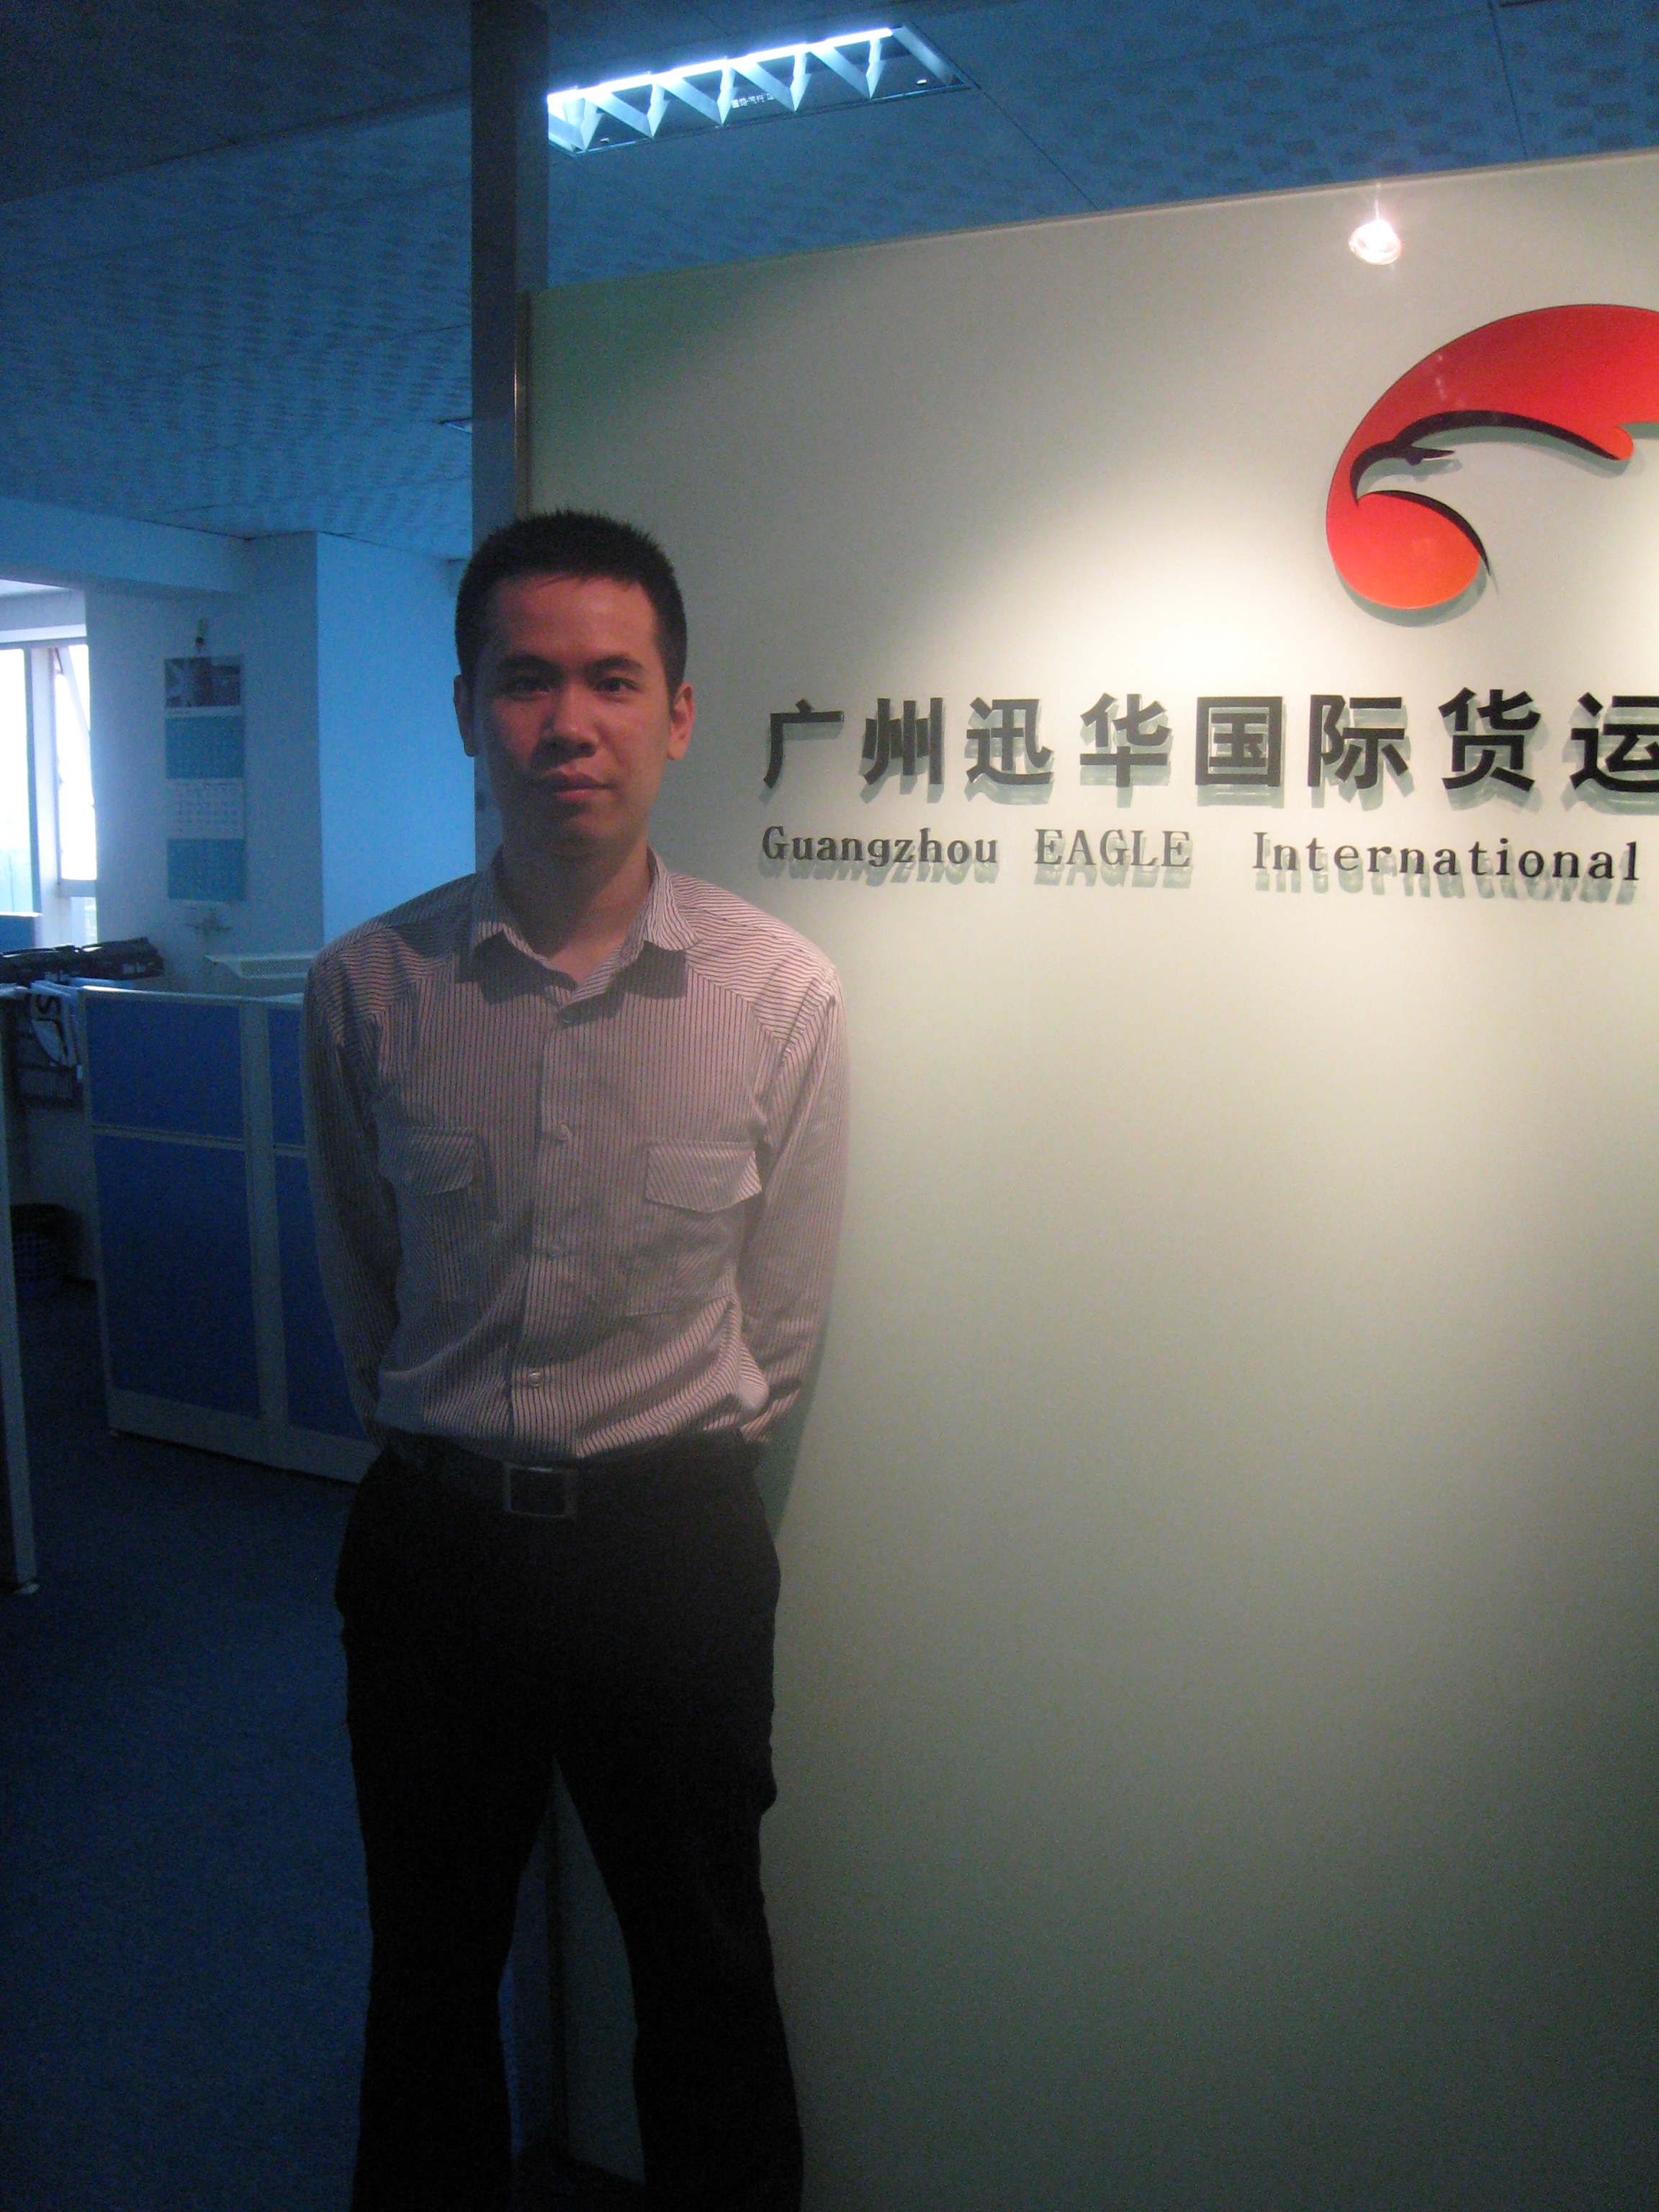 Interview with Sunny Zhang, the sale of Guangzhou EAGLE International Transportation Co., Ltd,